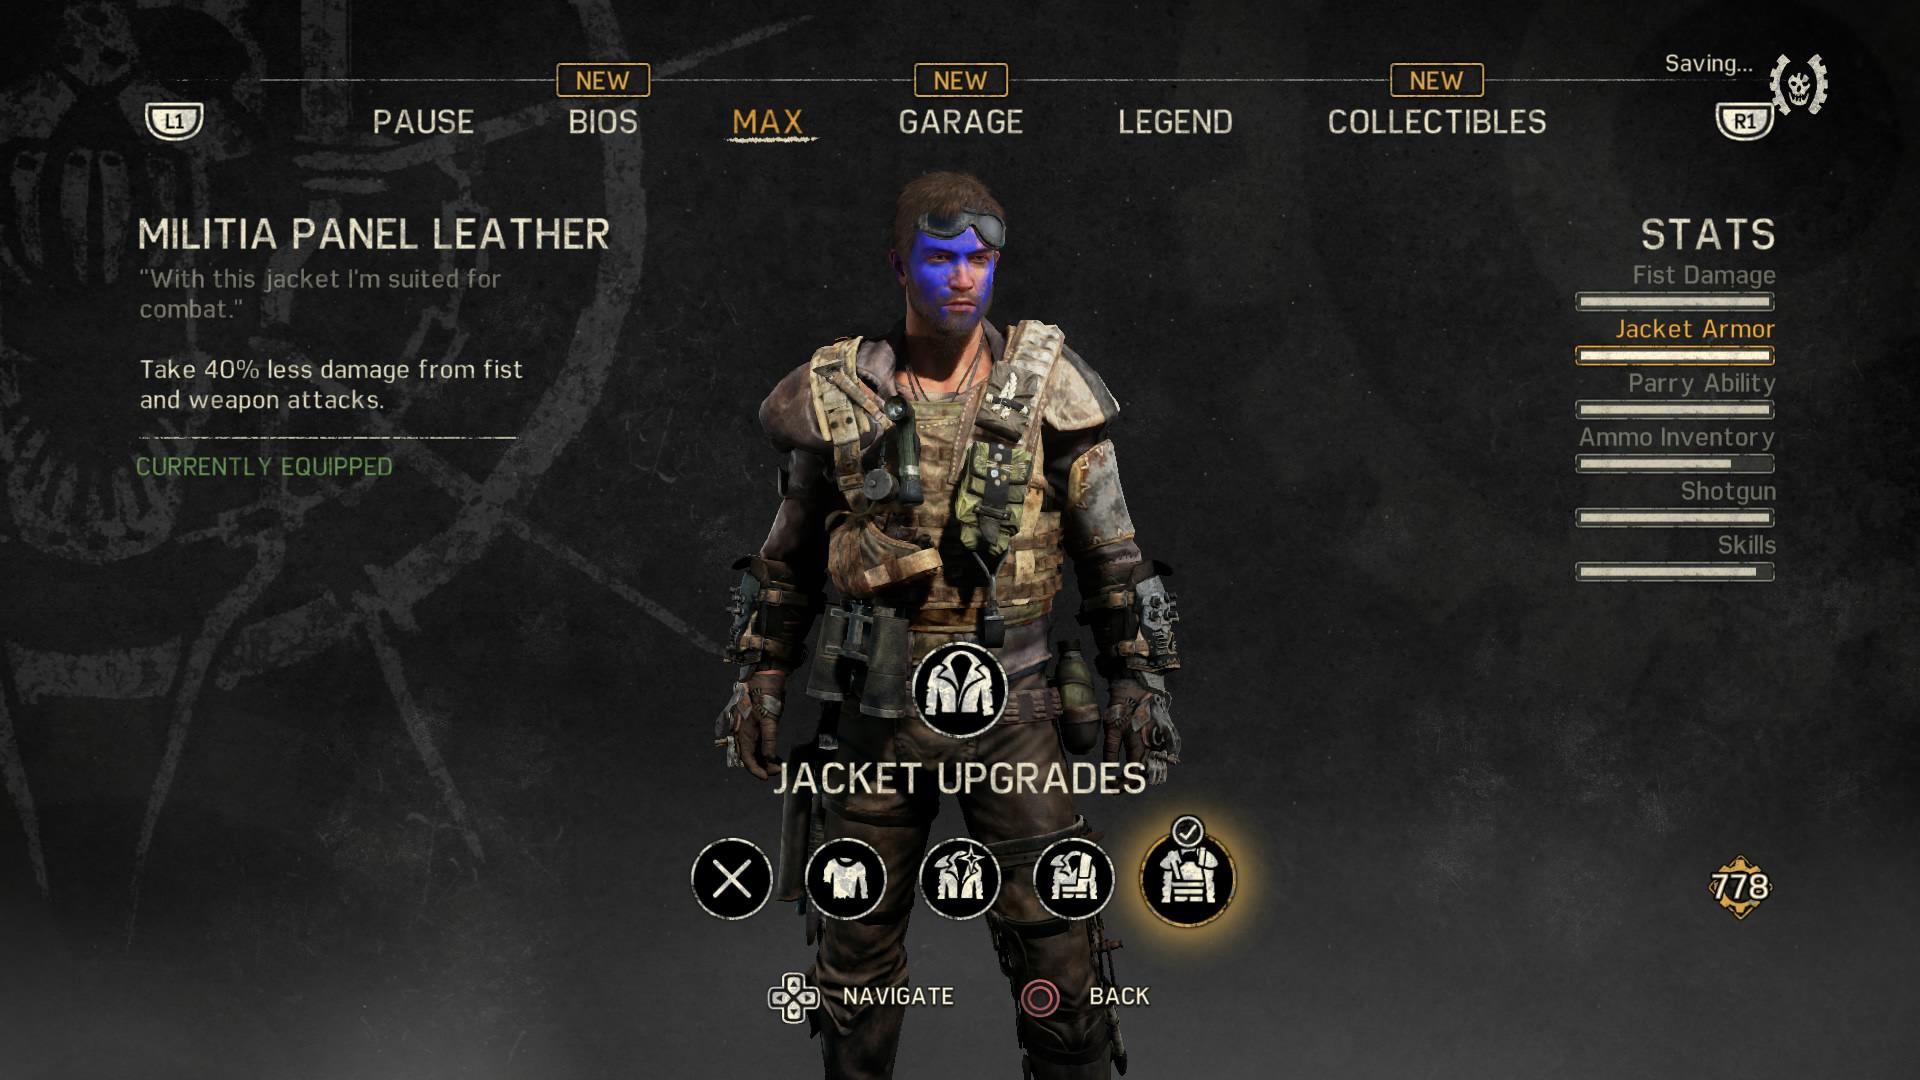 Mad Max - All Max's Outfits/Gears/Upgrades/Weapons (Max Fully Upgraded)  SHOWCASE 